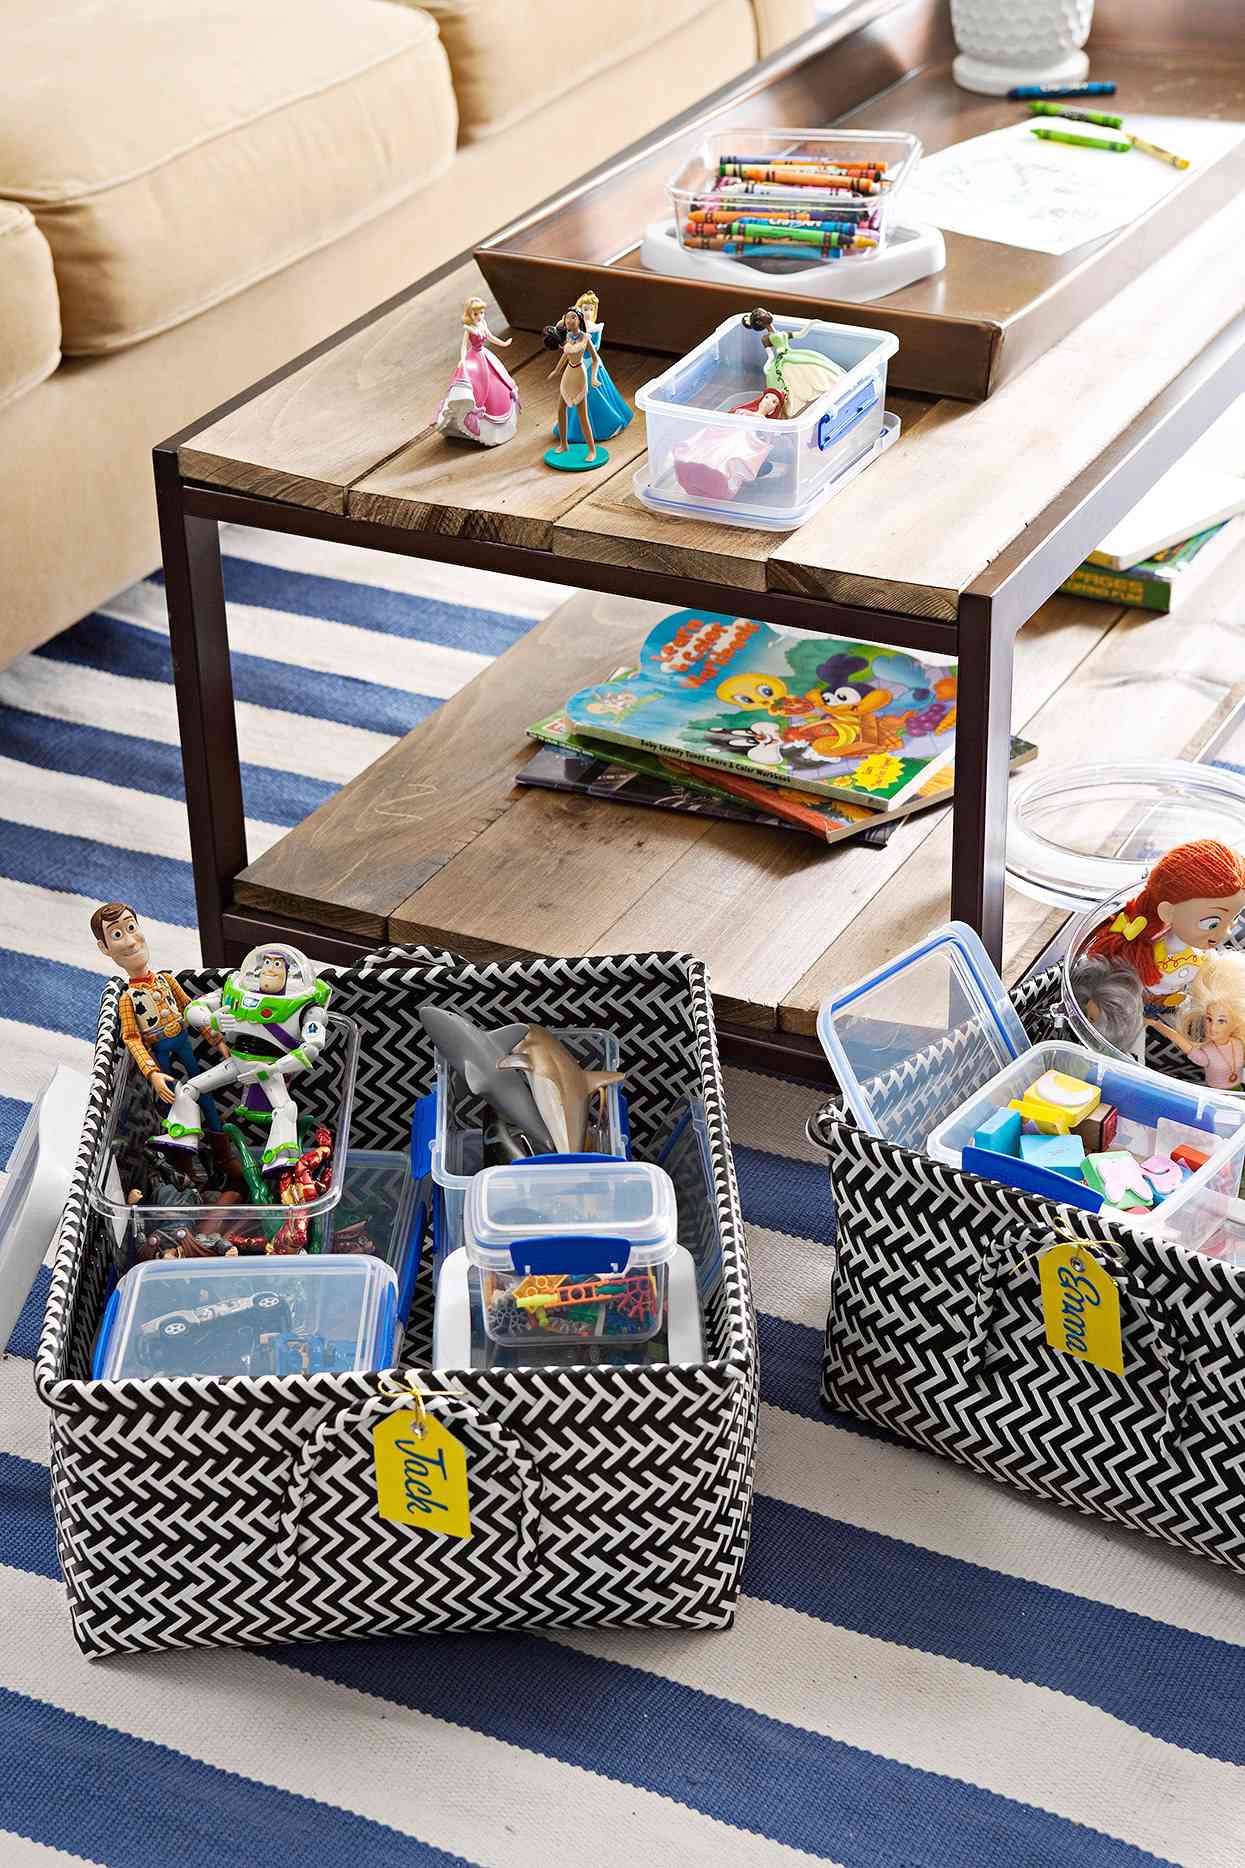 black-and-white labeled baskets with various toys